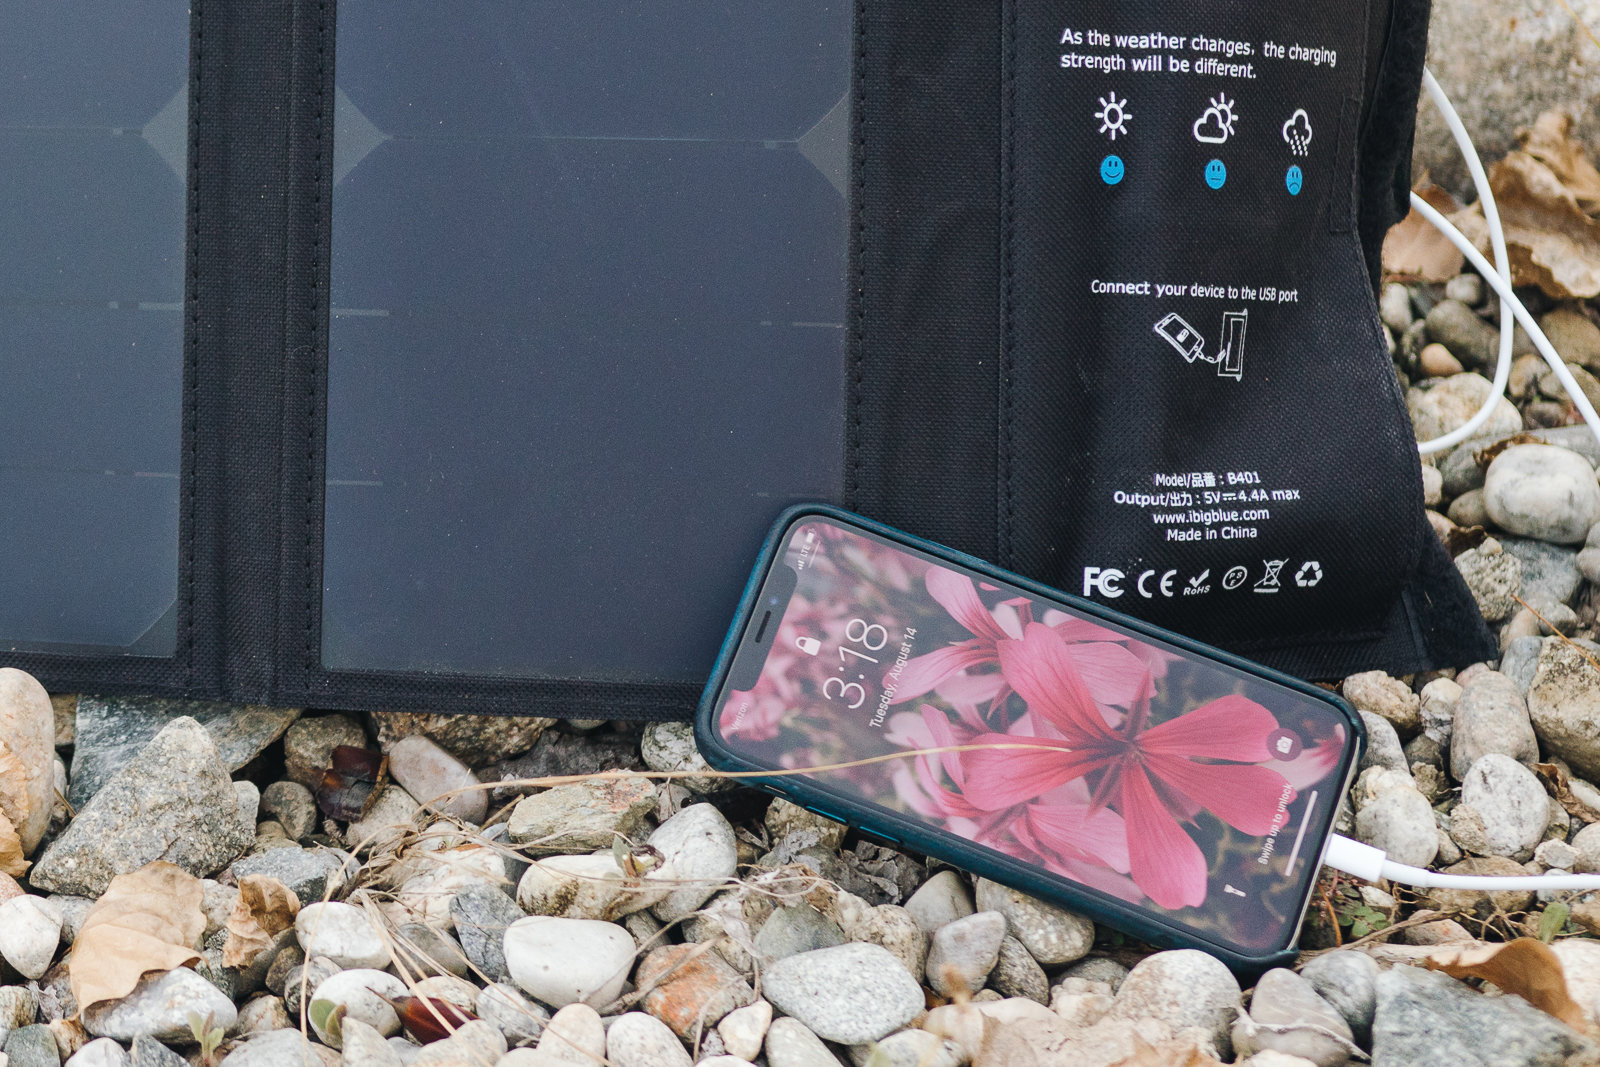 Portable solar charger